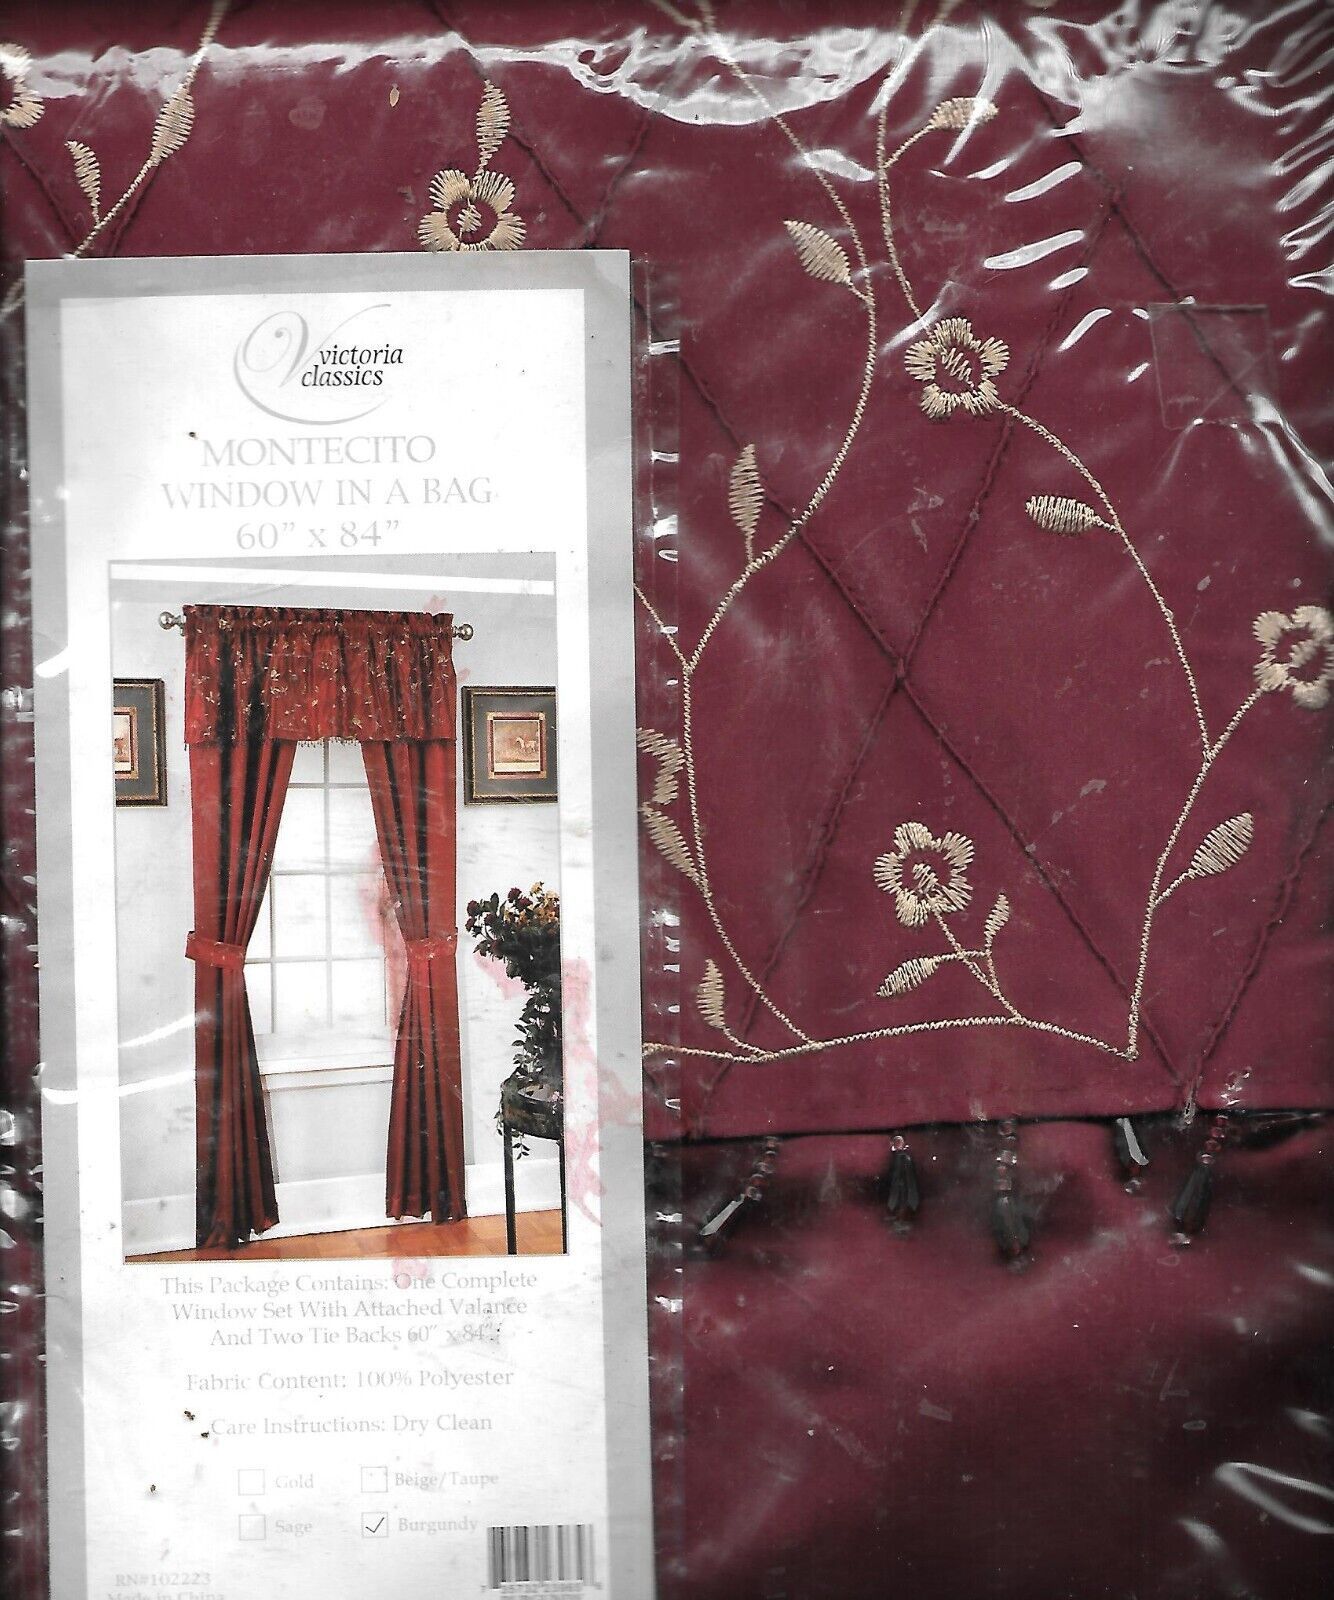 Primary image for Victoria Classics Window in a Bag - Burgundy/Gold w/Bead Tassles 60 x 84 -NIP